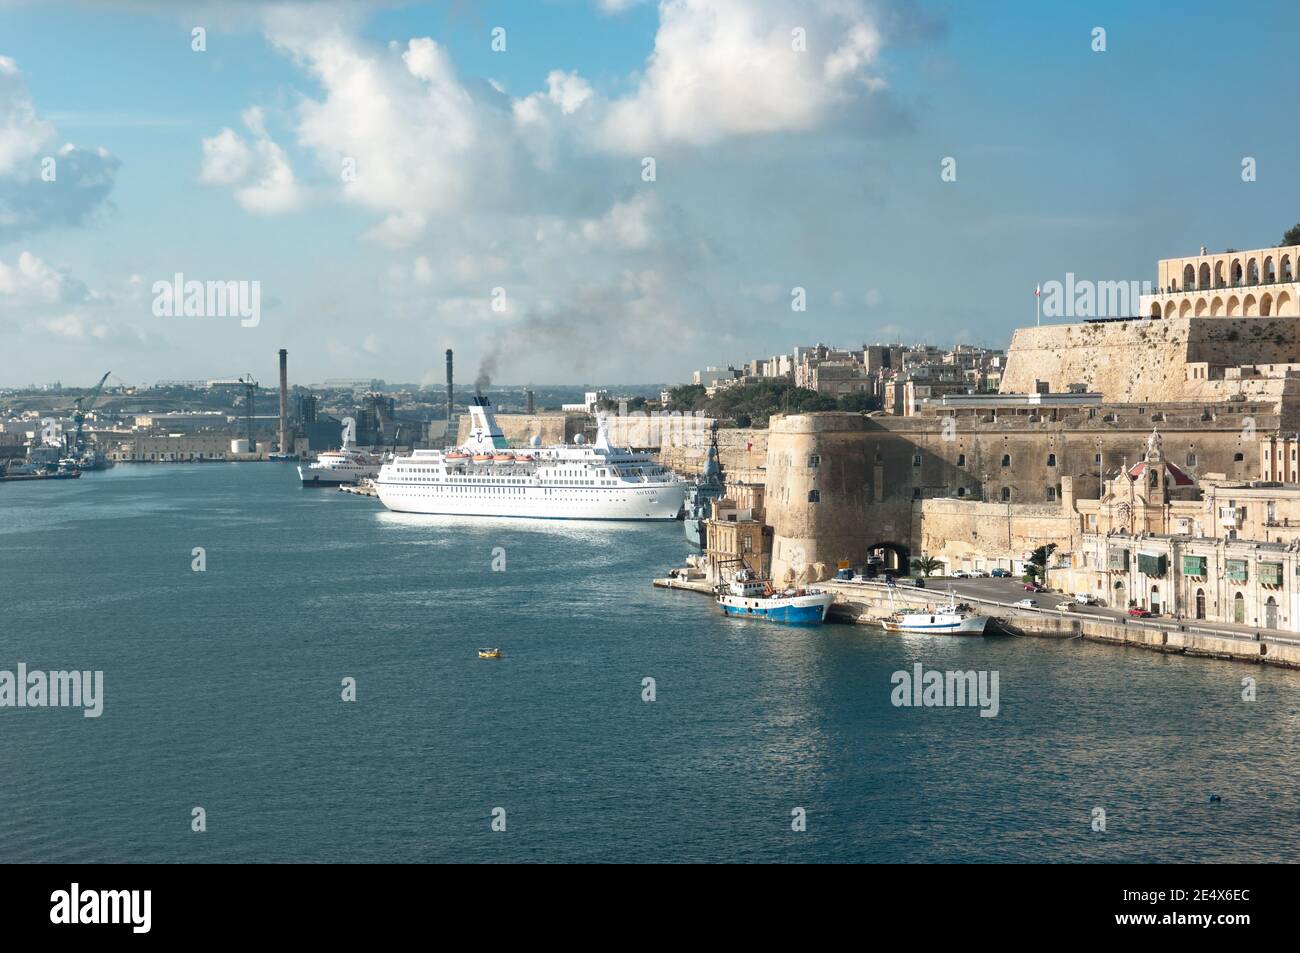 Valletta, Malta - November 27, 2011: view of Valletta and Grand Harbour with a passenger ship moored Stock Photo